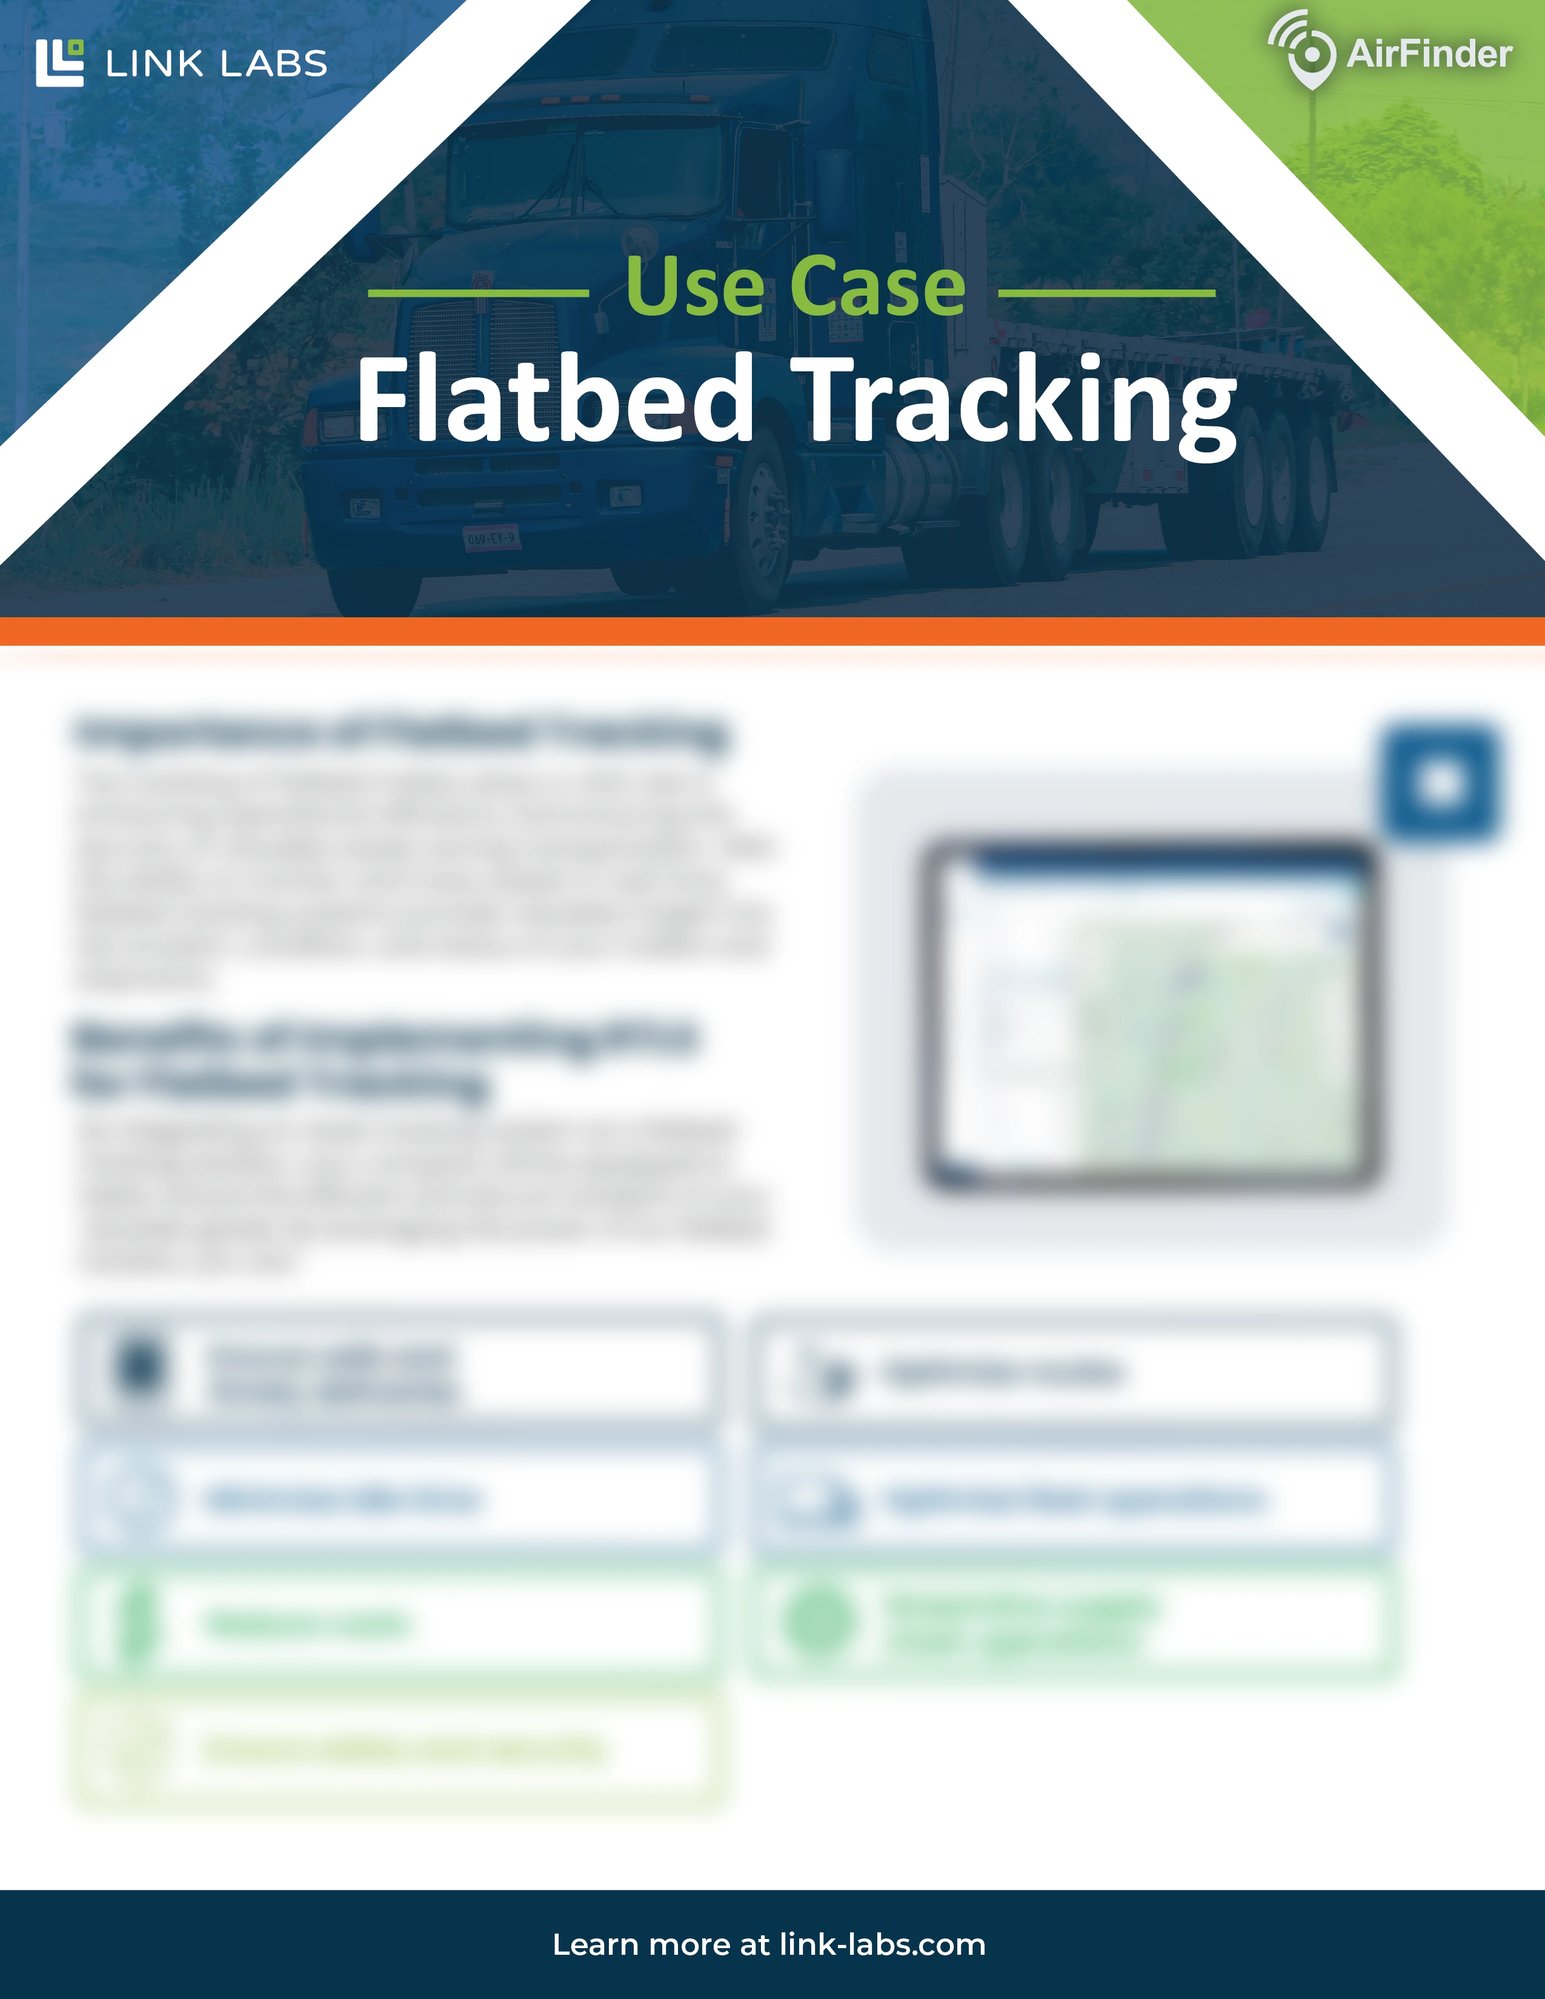 Flatbed Tracking